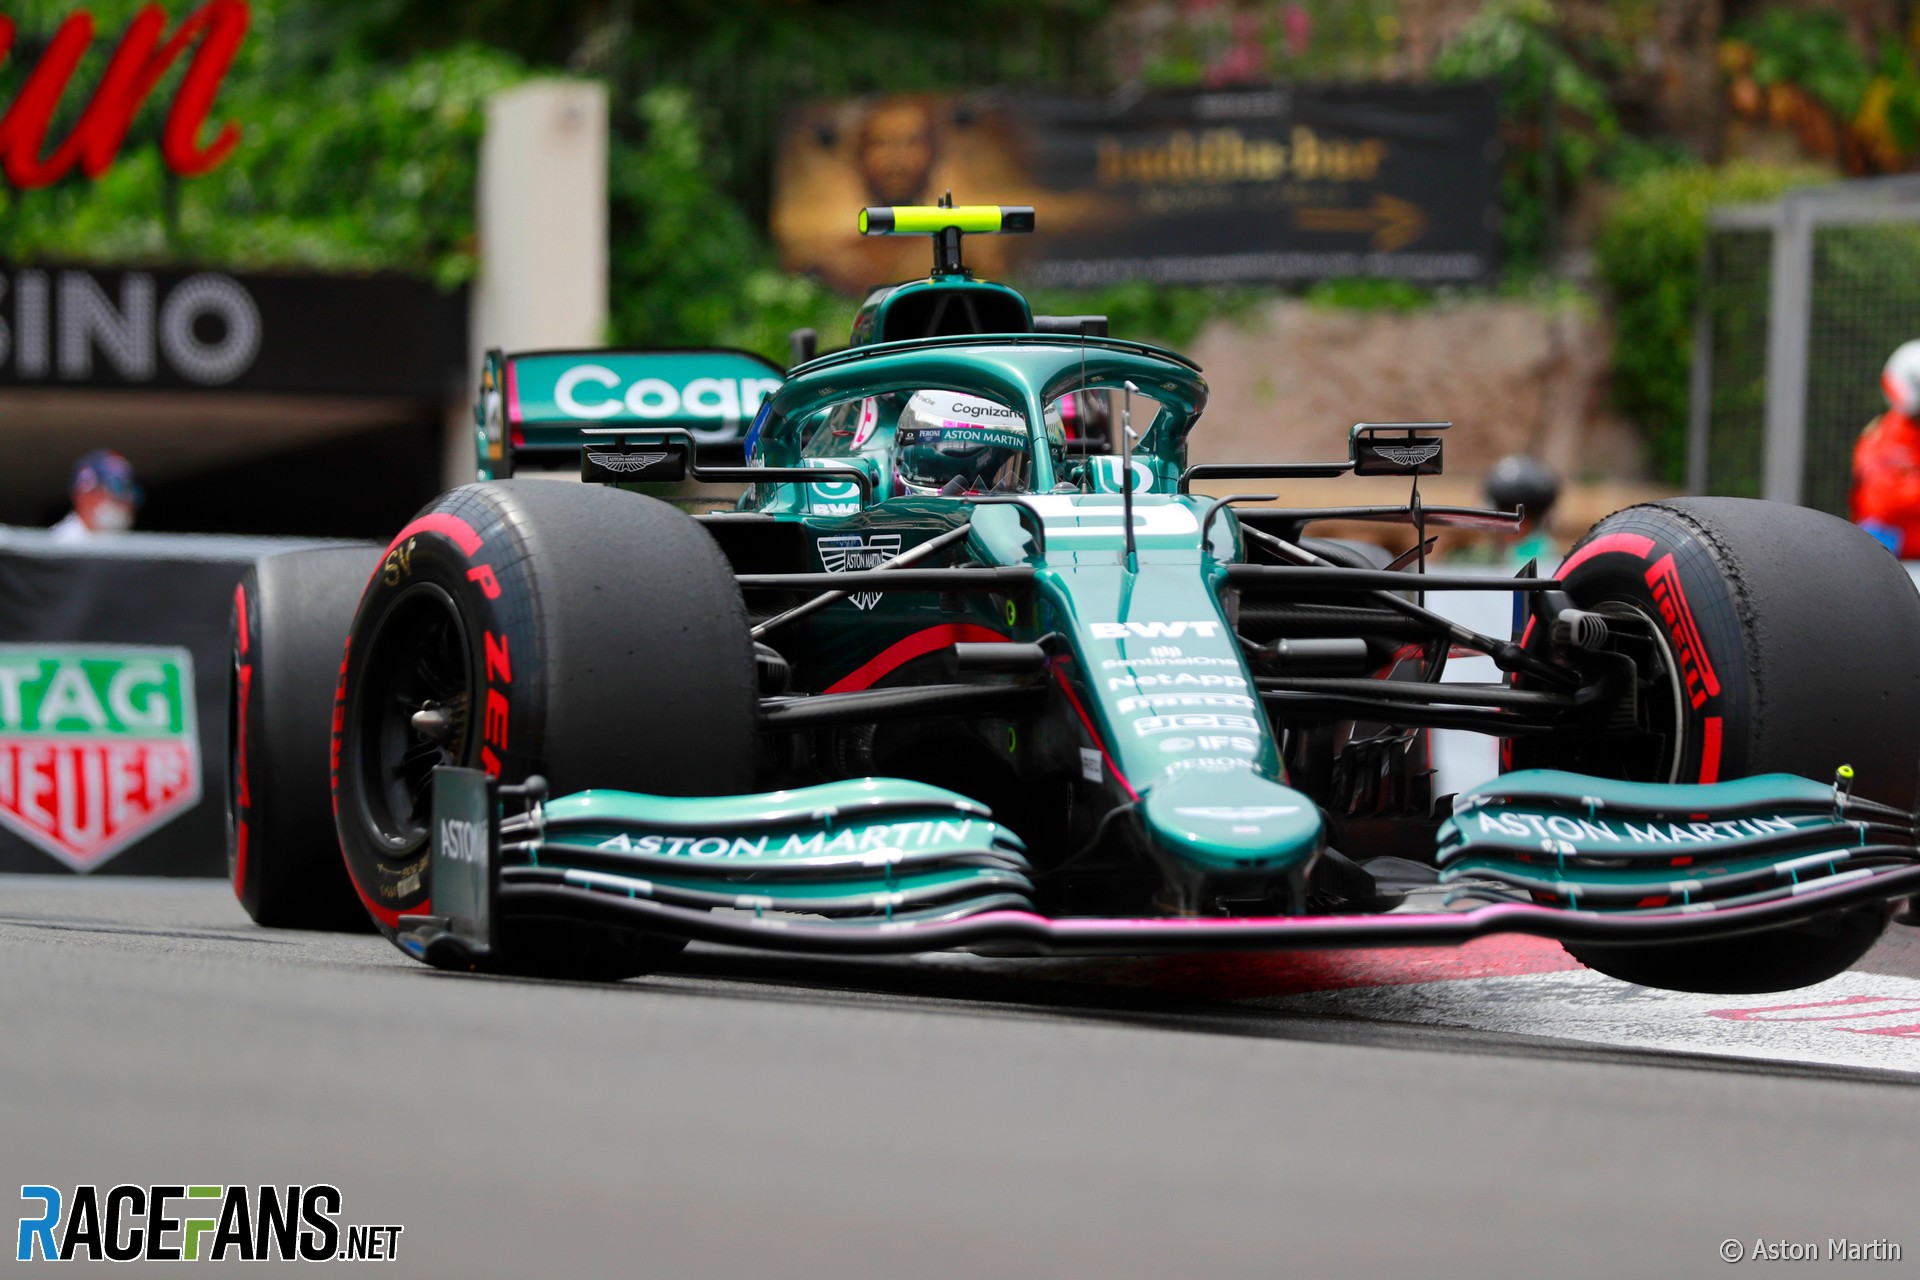 F1 pictures: 2021 Monaco Grand Prix qualifying day | RaceFans